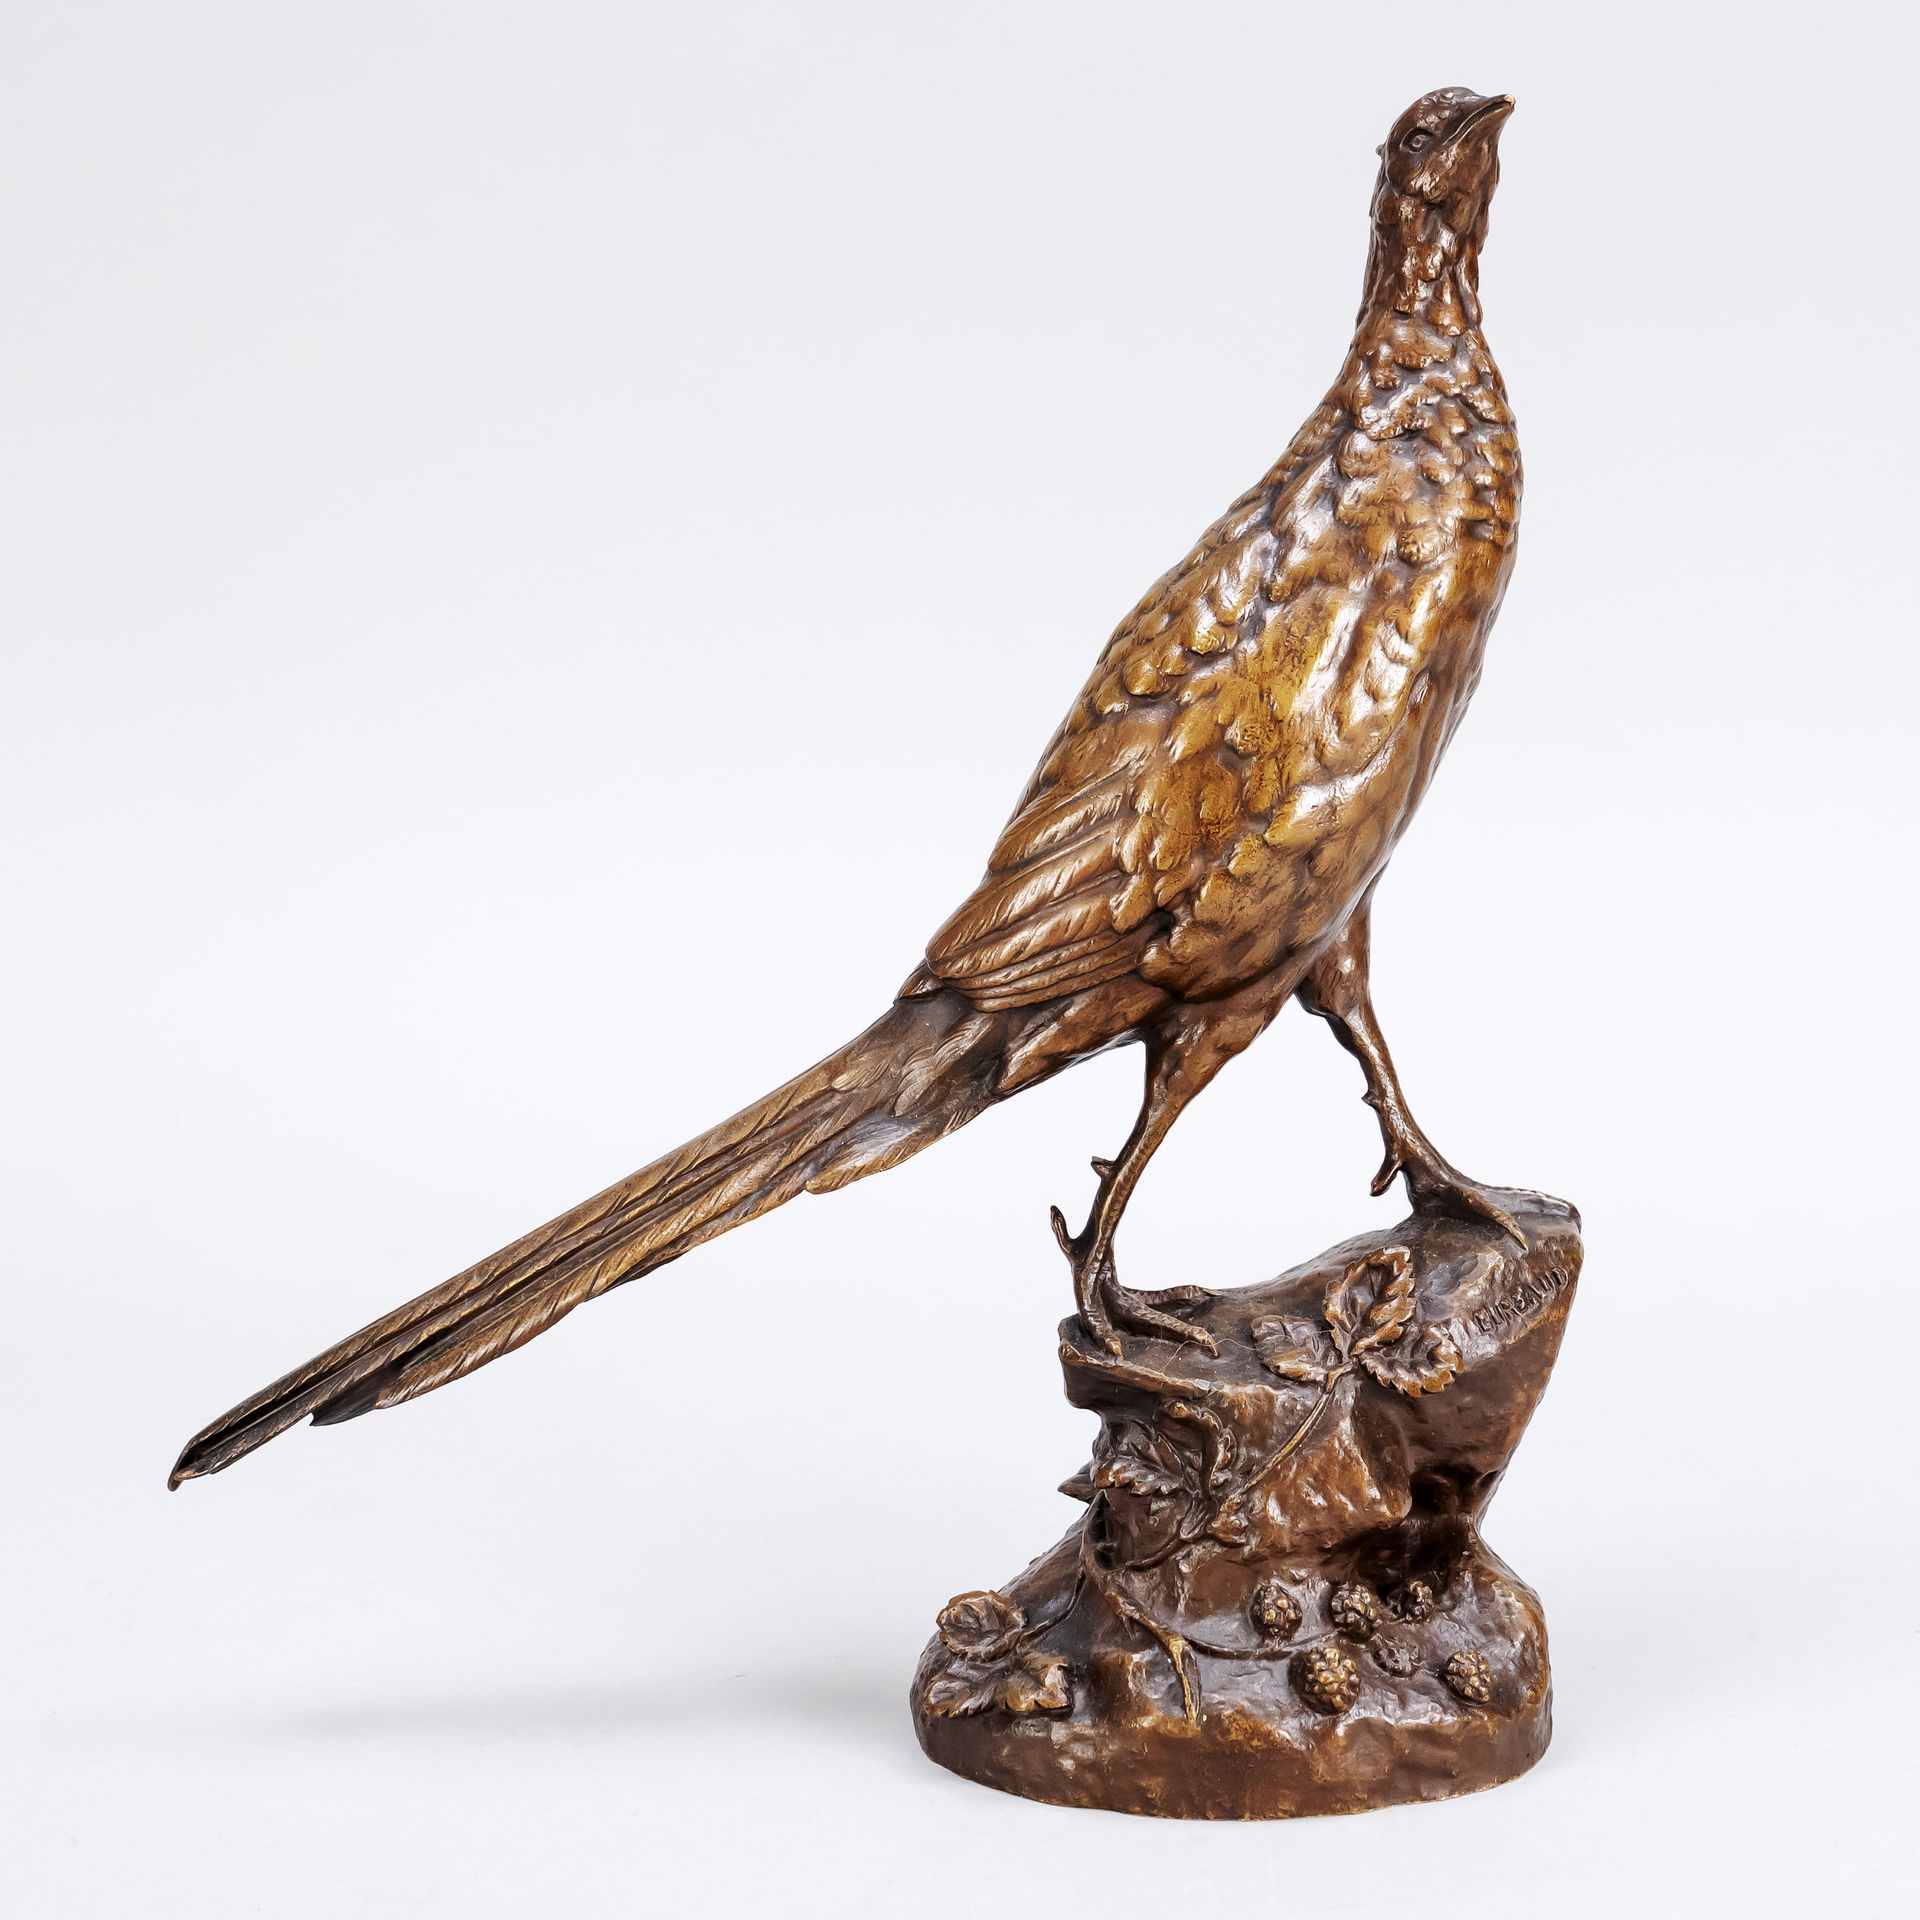 Null signed Bureaud, sculptor around 1900, small pheasant, brown patinated bronz&hellip;